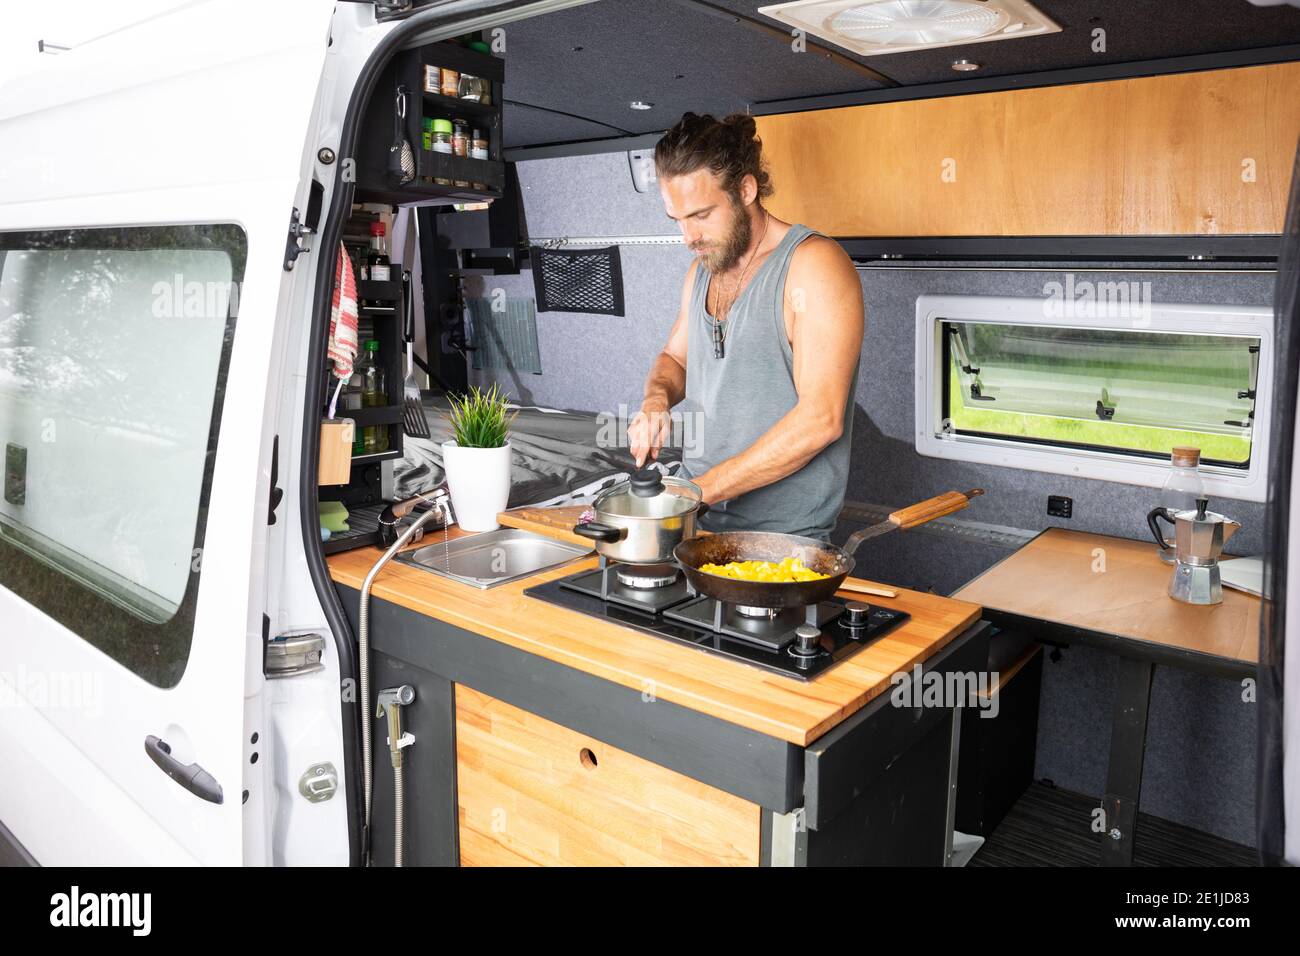 Man cooking in the kitchen area of his camper van Stock Photo